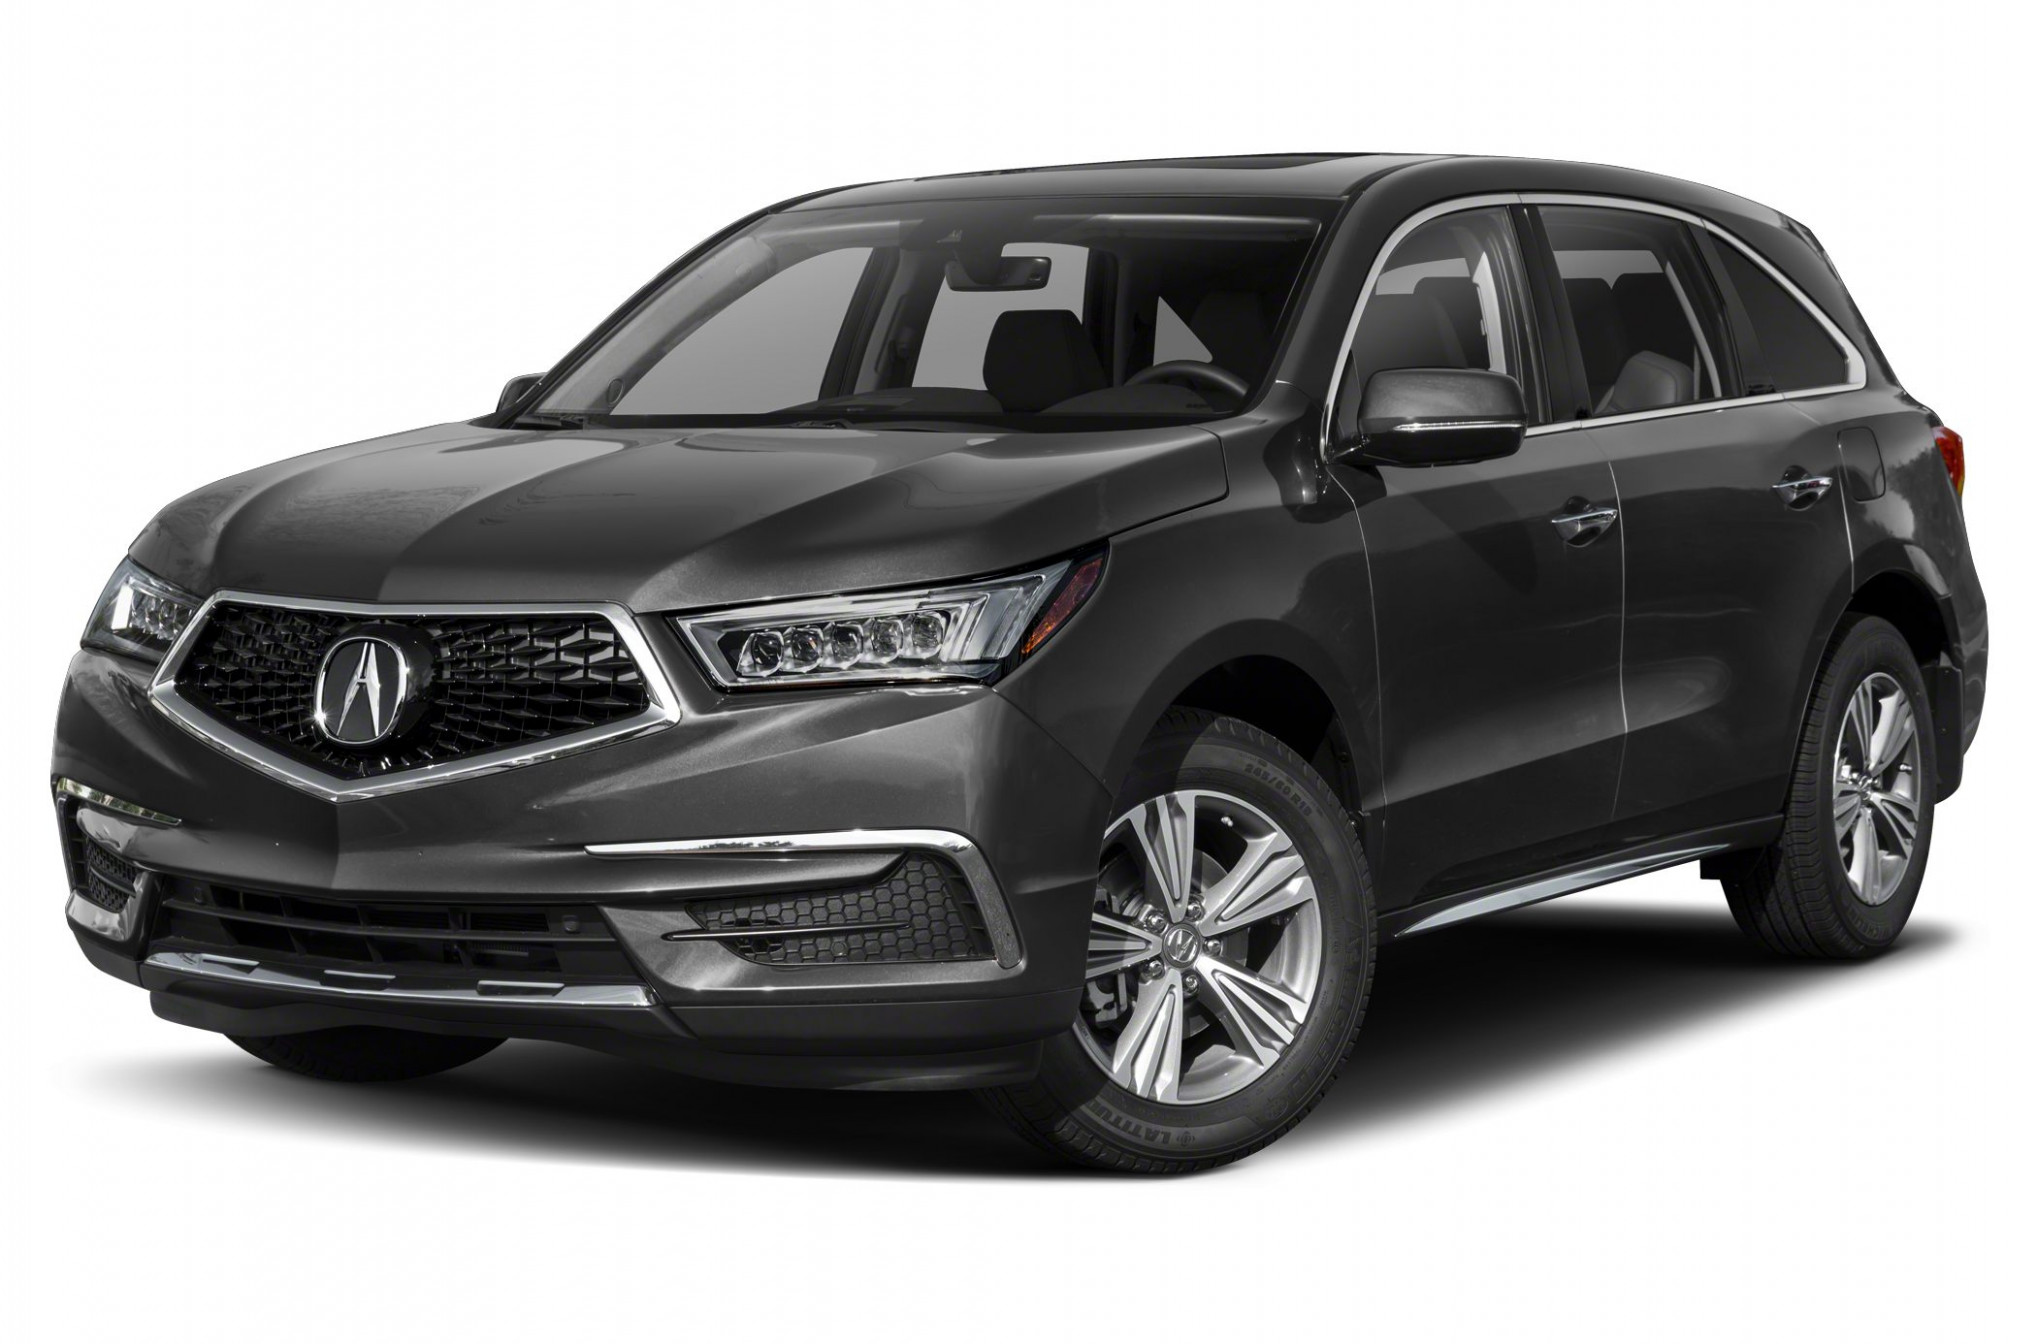 Price and Review how much is a acura mdx